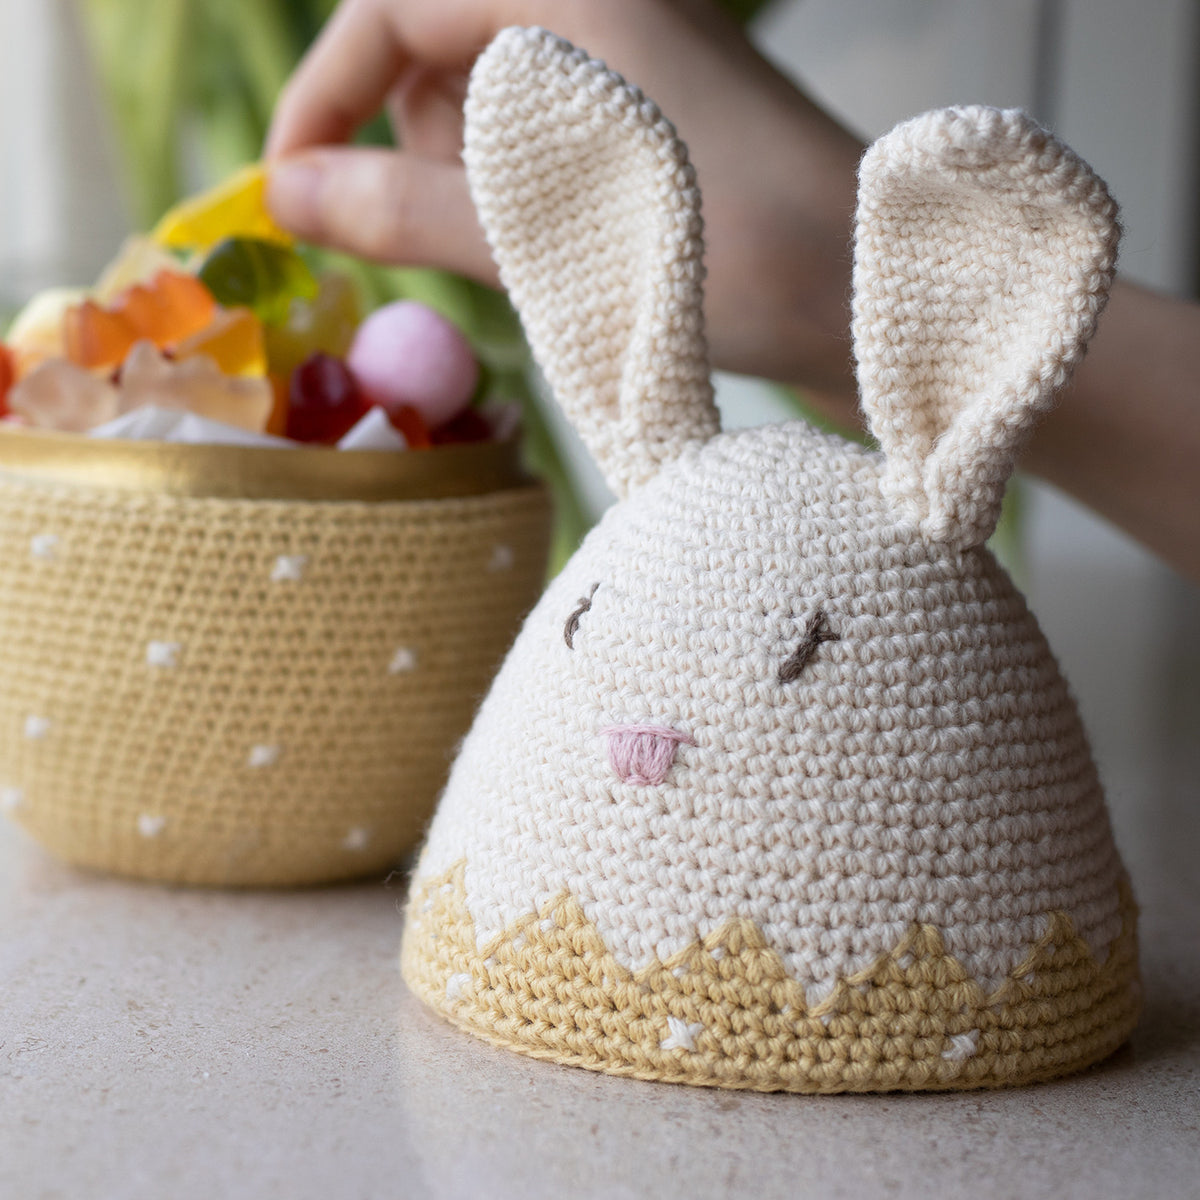 Two-piece Easter Egg no 2 - Crochet pattern